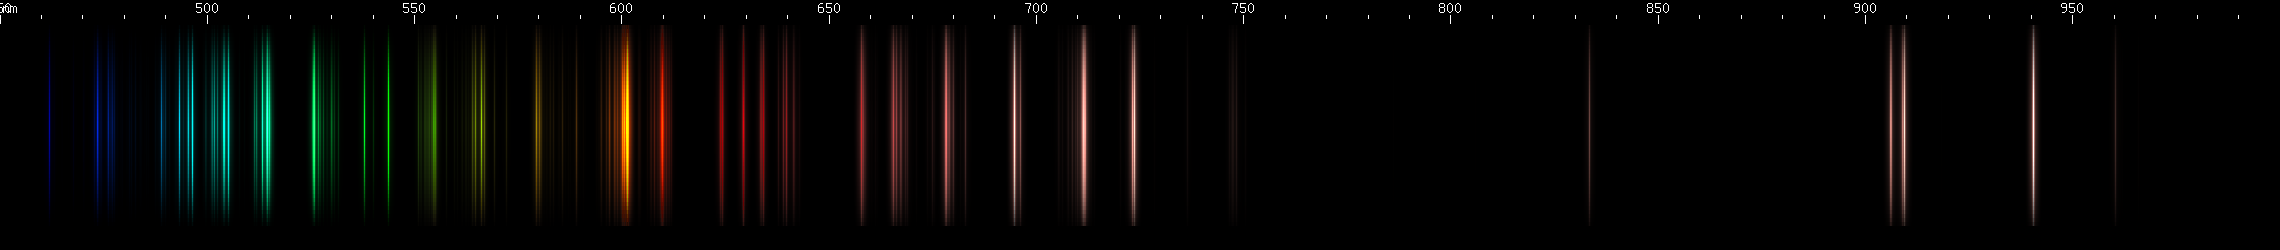 Spectral lines of Carbon.